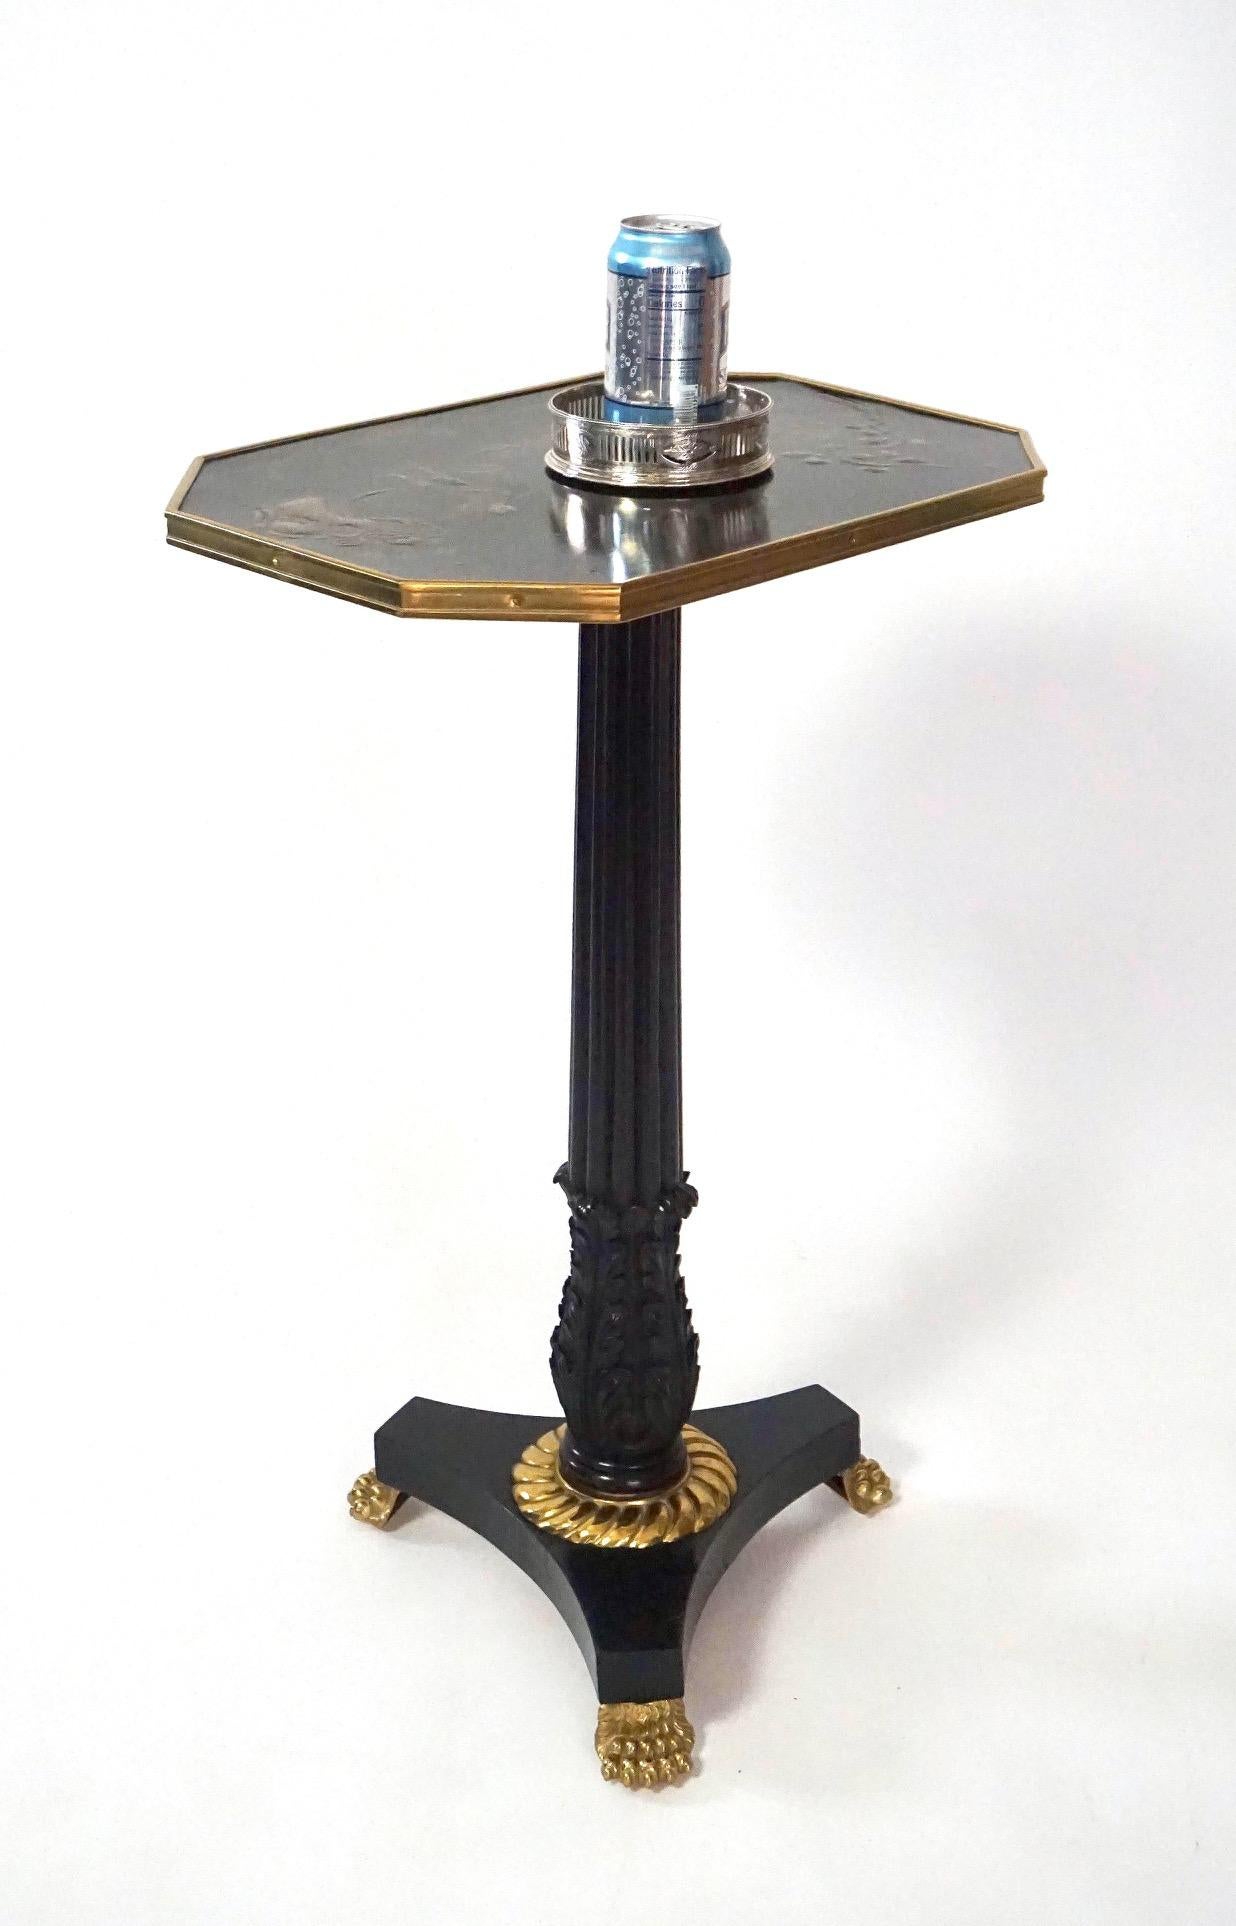 English Regency Chinoiserie Lacquer Top Ebonized Brass Mounted Stand, circa 1820 For Sale 6